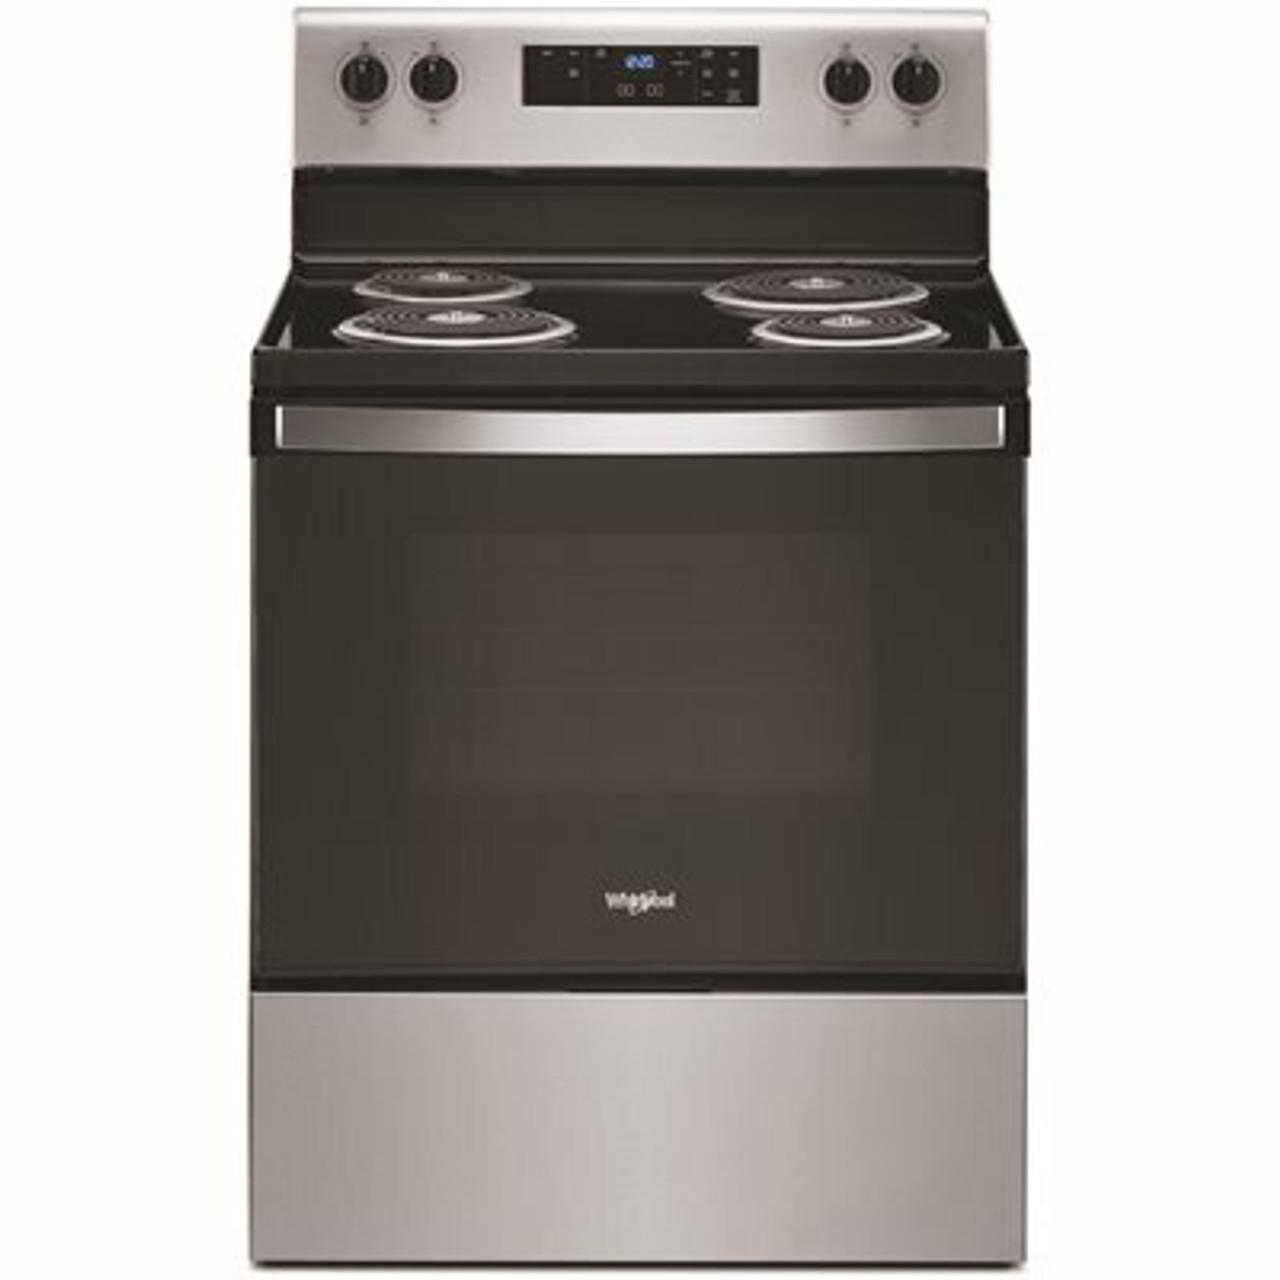 Whirlpool 30 In. 4.8 Cu. Ft. 4-Burner Electric Range With Self-Cleaning In Stainless Steel With Storage Drawer